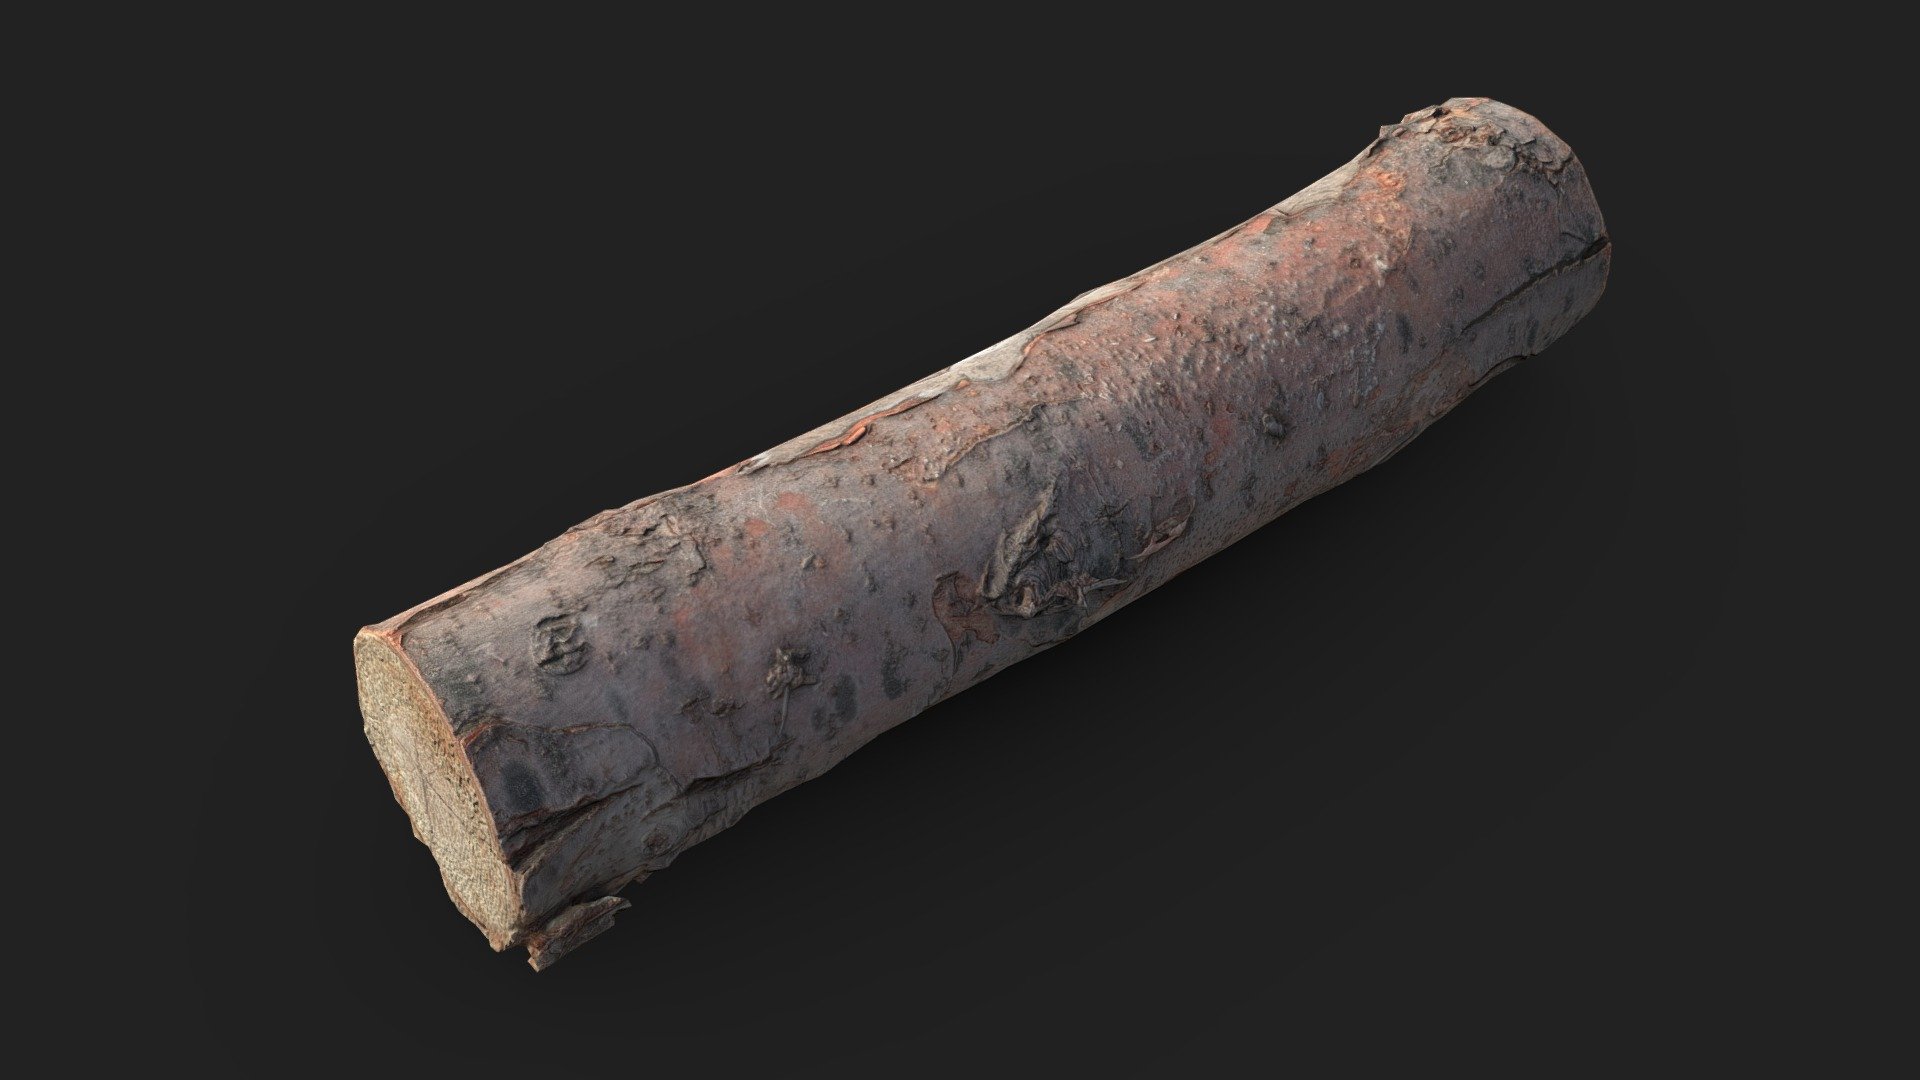 Firewood that is suitable for creating rustic or forest scenes.

Technical specifications:

Close-up scan model

Optimized model

non-overlapping UV map

ready for animation

PBR textures 2K resolution: Normal, Roughness, Albedo, Ambient Occlusion maps

Download package includes FBX, which are applicable for 3ds Max, Maya, Unreal Engine, Unity, Blender.

Enjoy! - Firewood Scan - Buy Royalty Free 3D model by U3DA (@unreal.artists) 3d model